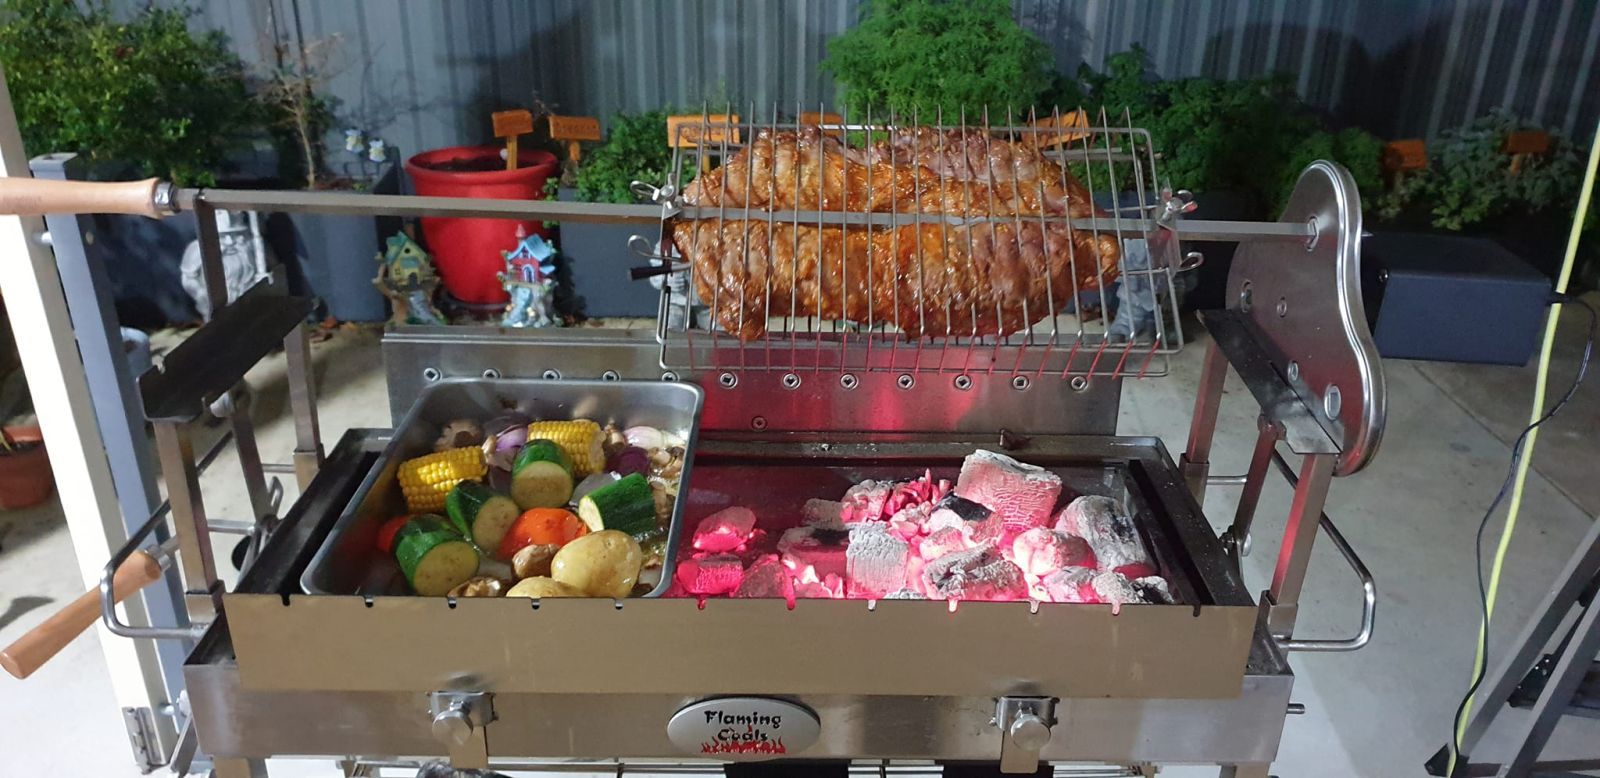 This is a picture sent in by a customer who used his stainless steel Cyprus grill to cook a roast in the basket and veggies is a tray along side the charcoal 